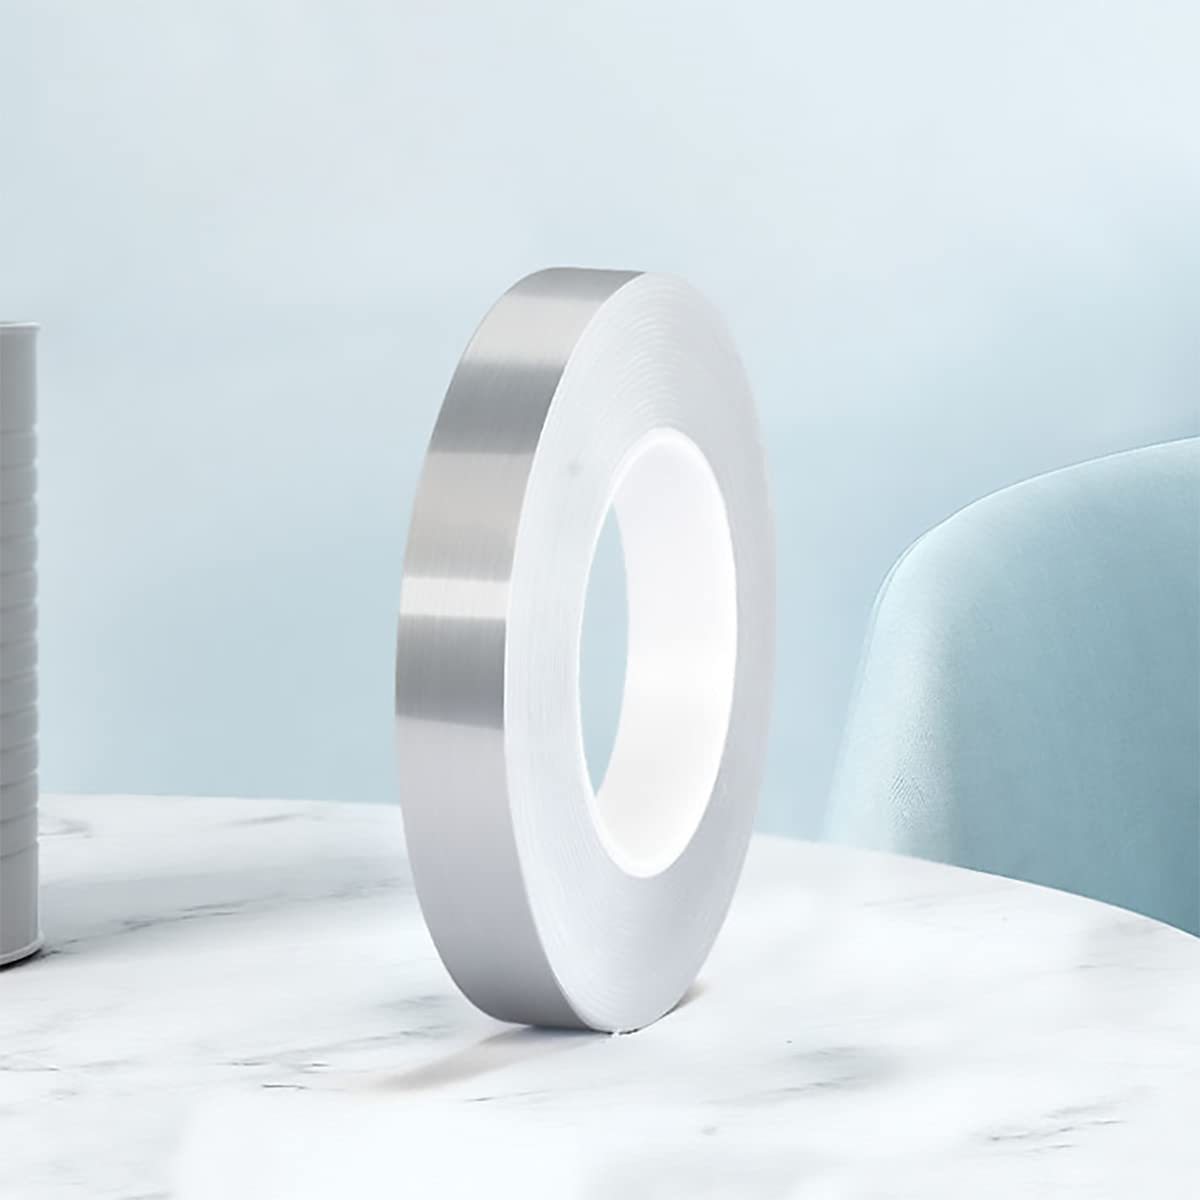 Silver Adhesive Tape